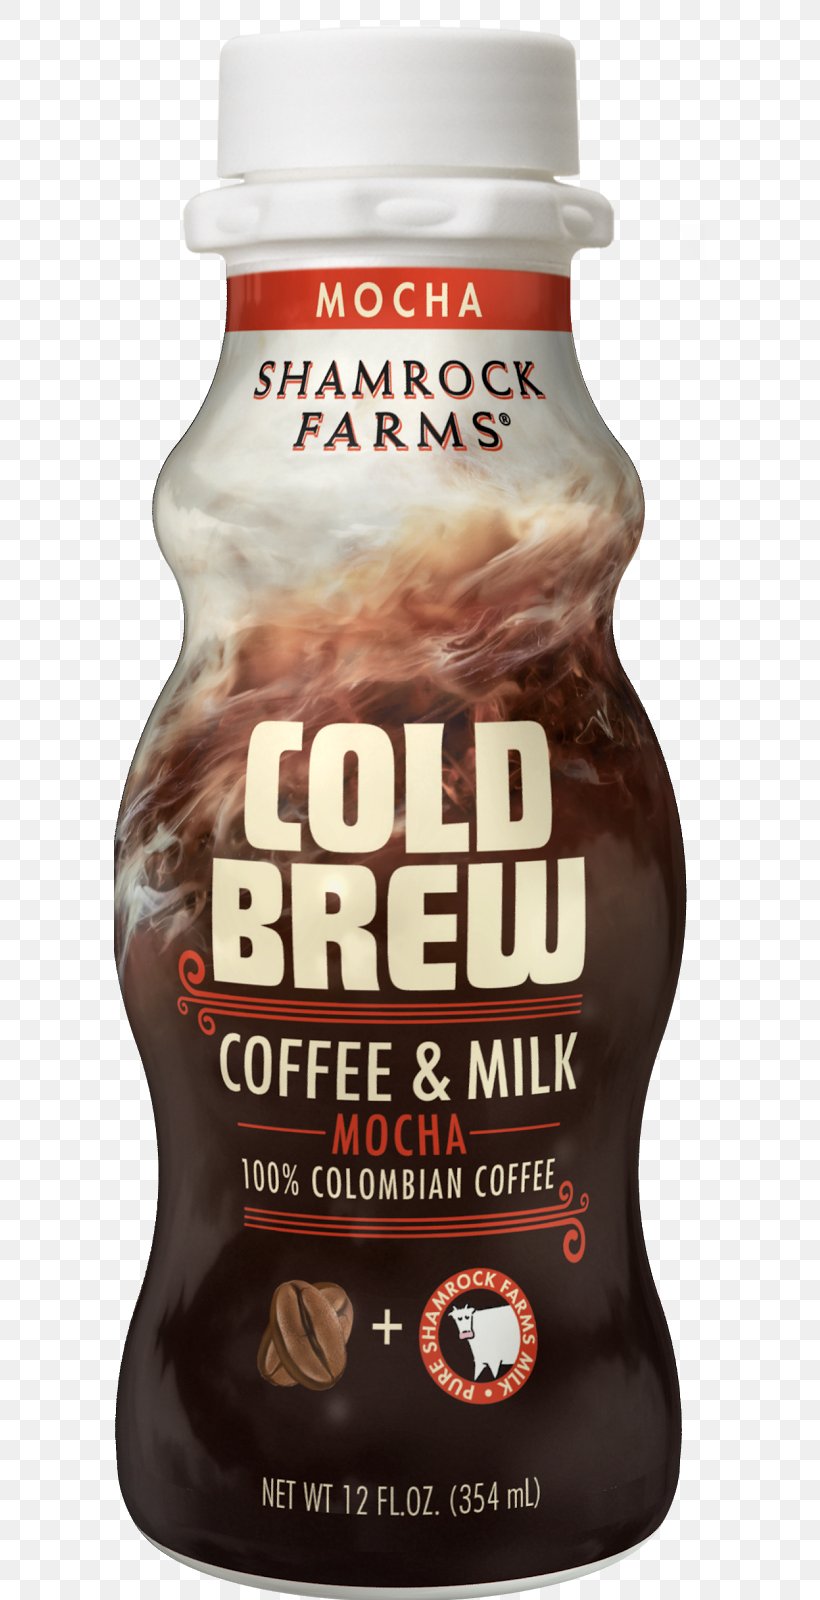 Cold Brew Iced Coffee Coffee Milk, PNG, 591x1600px, Cold Brew, Brewed Coffee, Chocolate Milk, Coffee, Coffee Milk Download Free